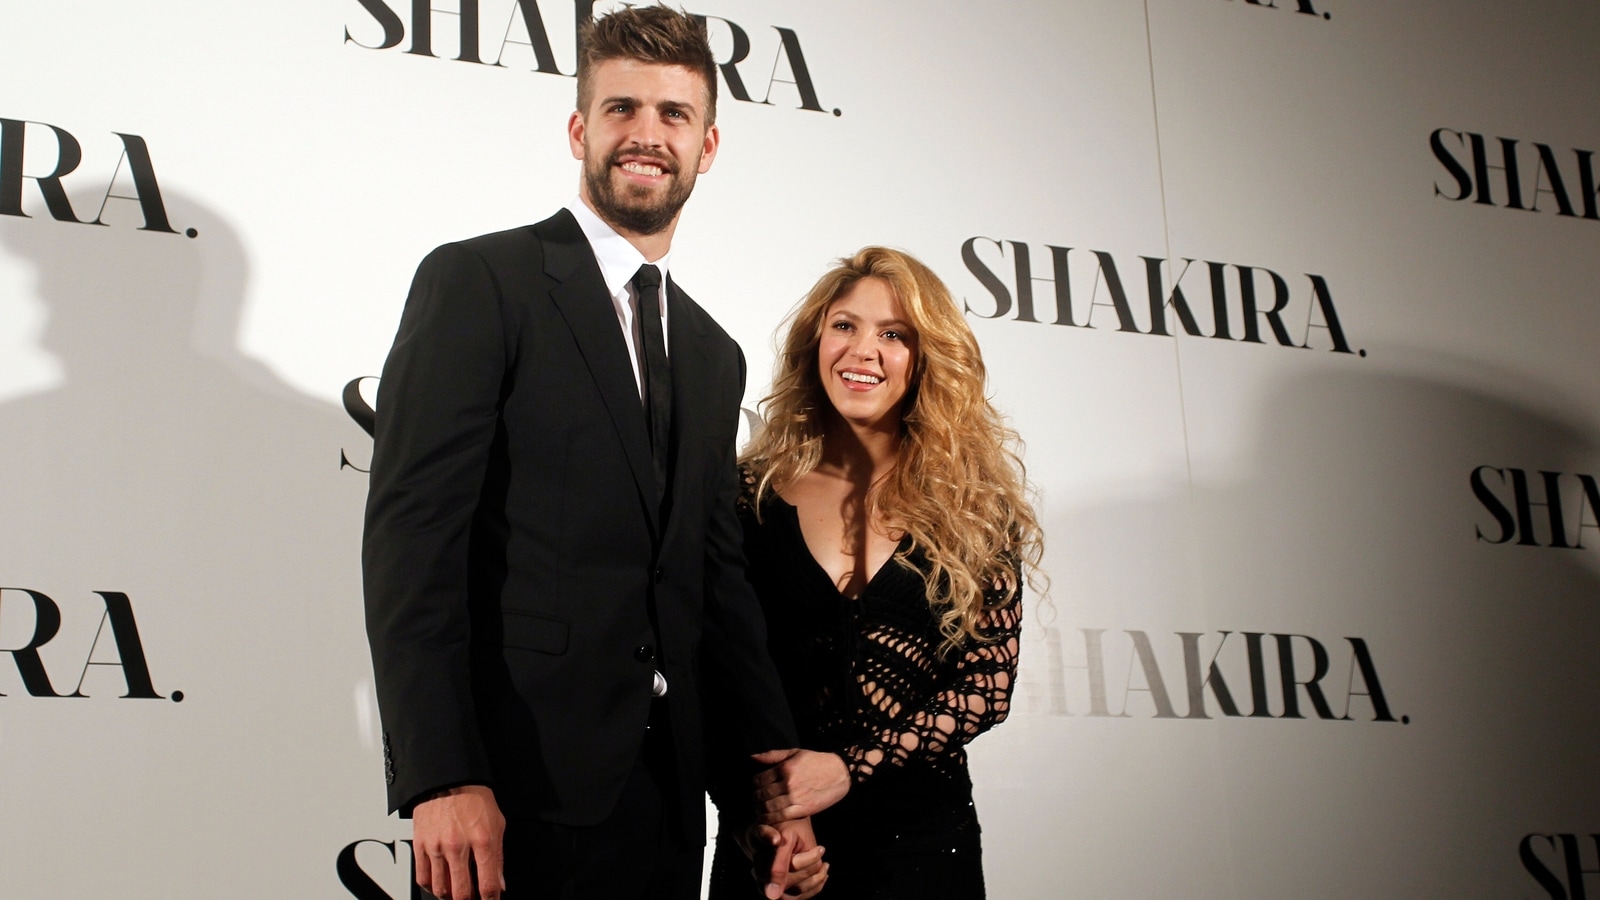 Shakira confirms split with soccer star Gerard Pique after 12 years: 'We ask that you respect our privacy'